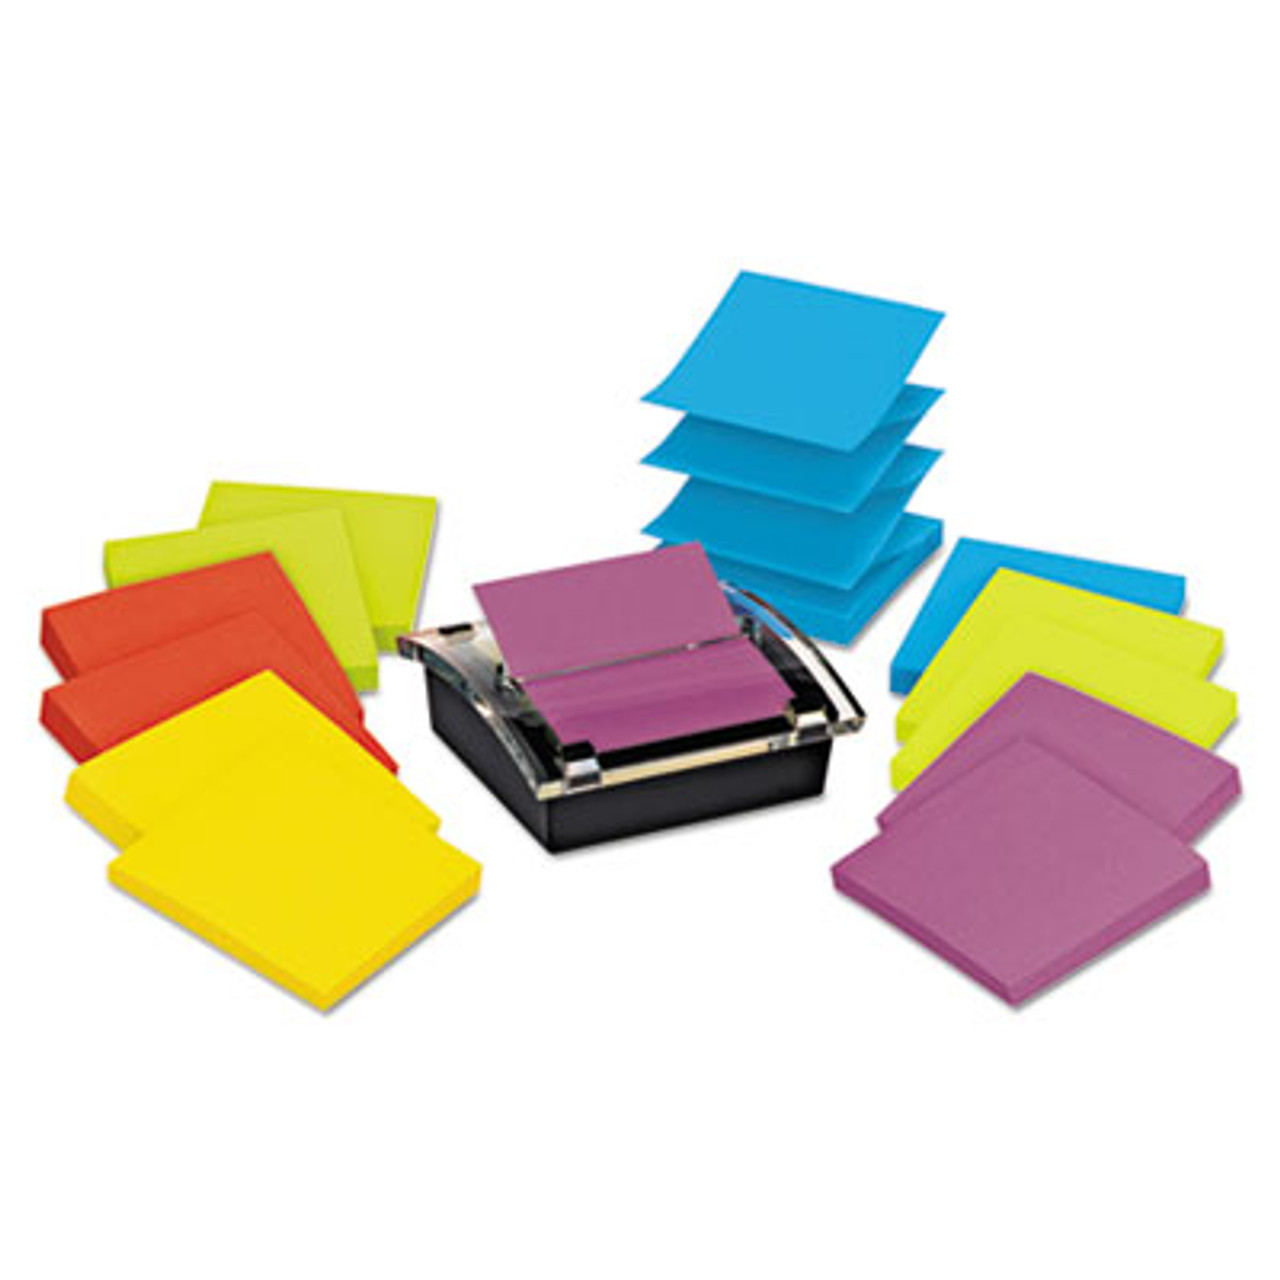 Post-it Original Pop-Up Notes Refill, 3 x 3, Assorted Cape Town Colors, 100-Sheet, 6/Pack